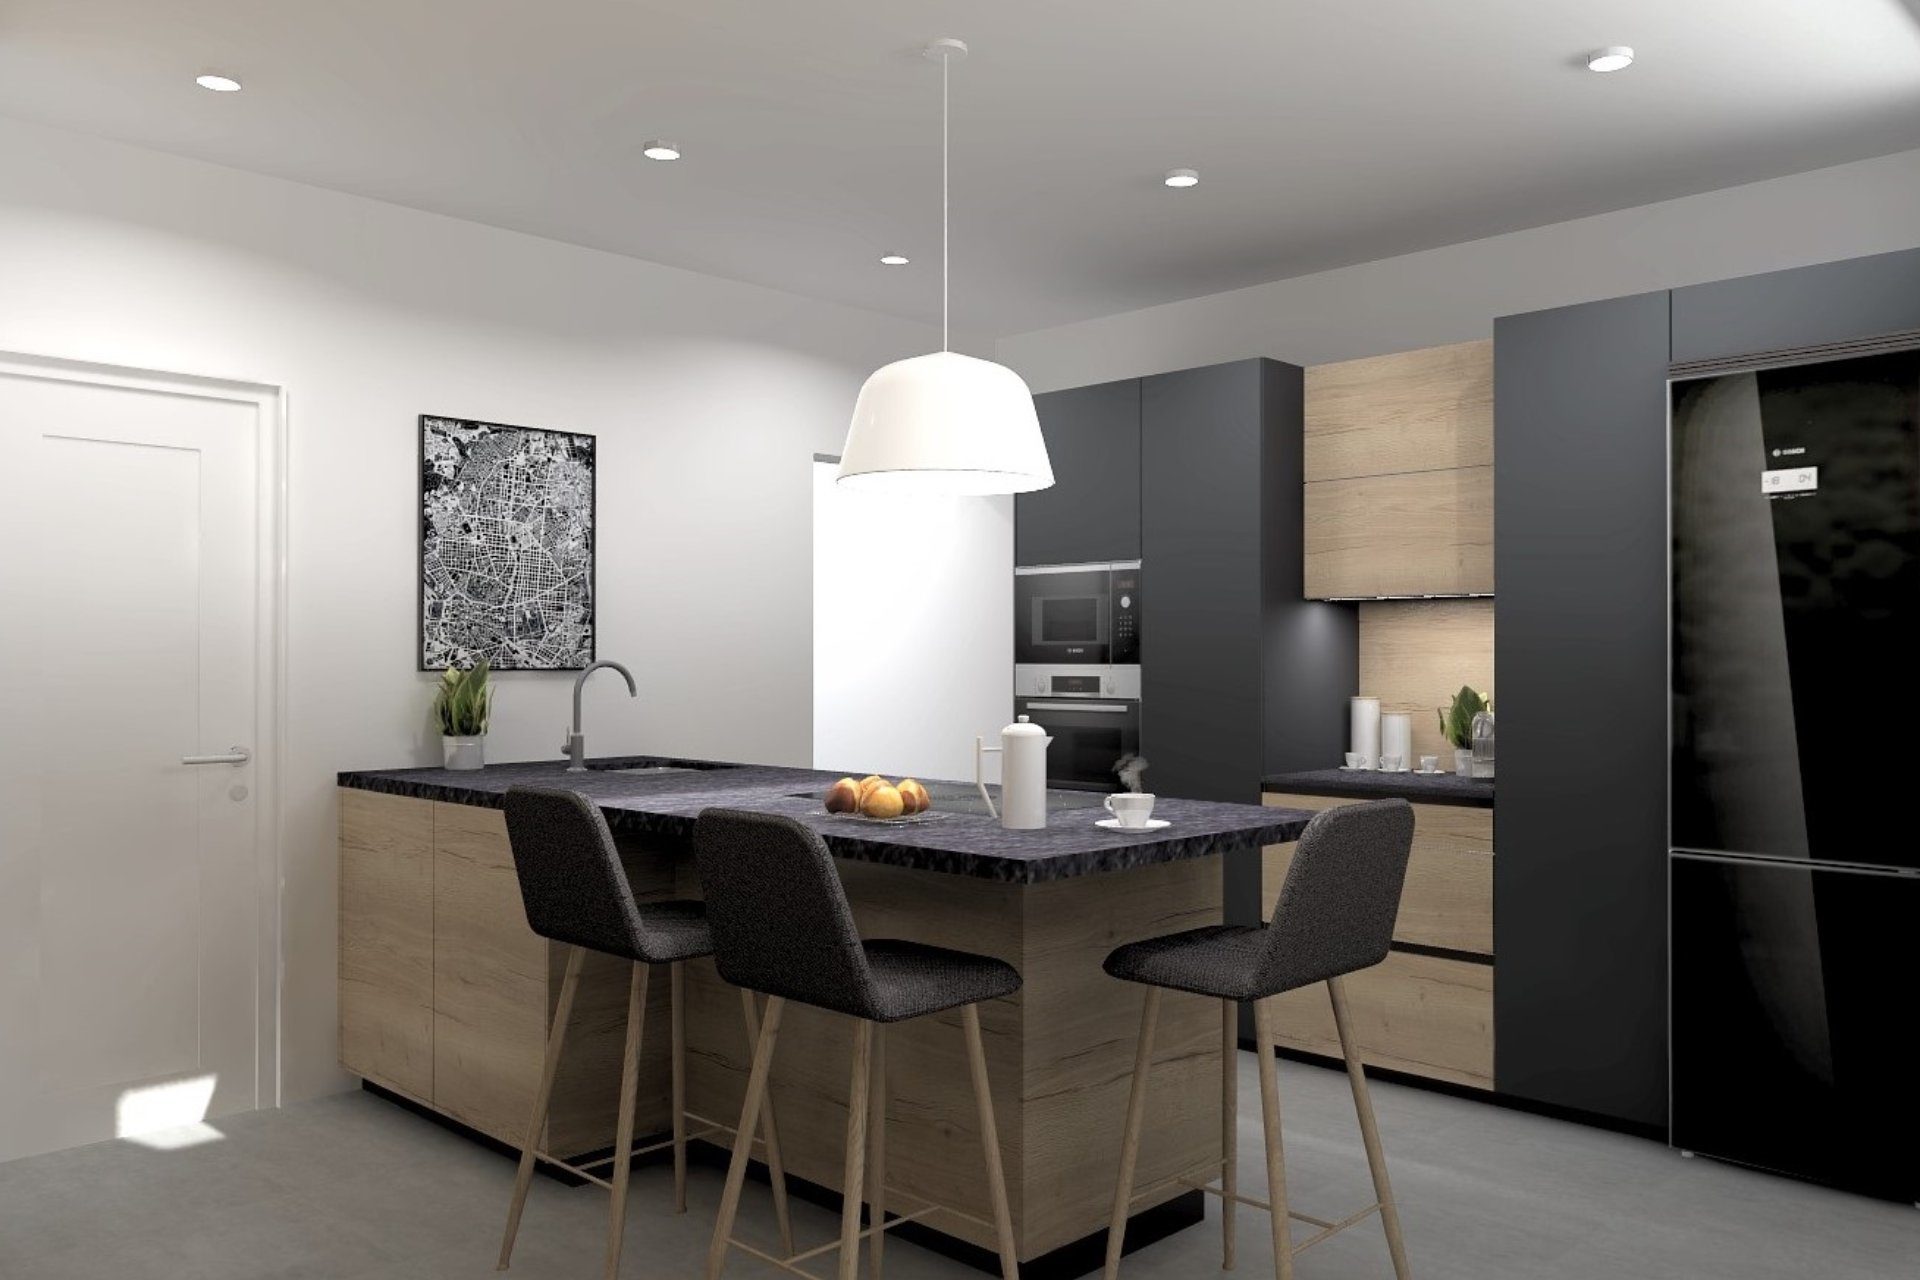 Kitchen with black and wood